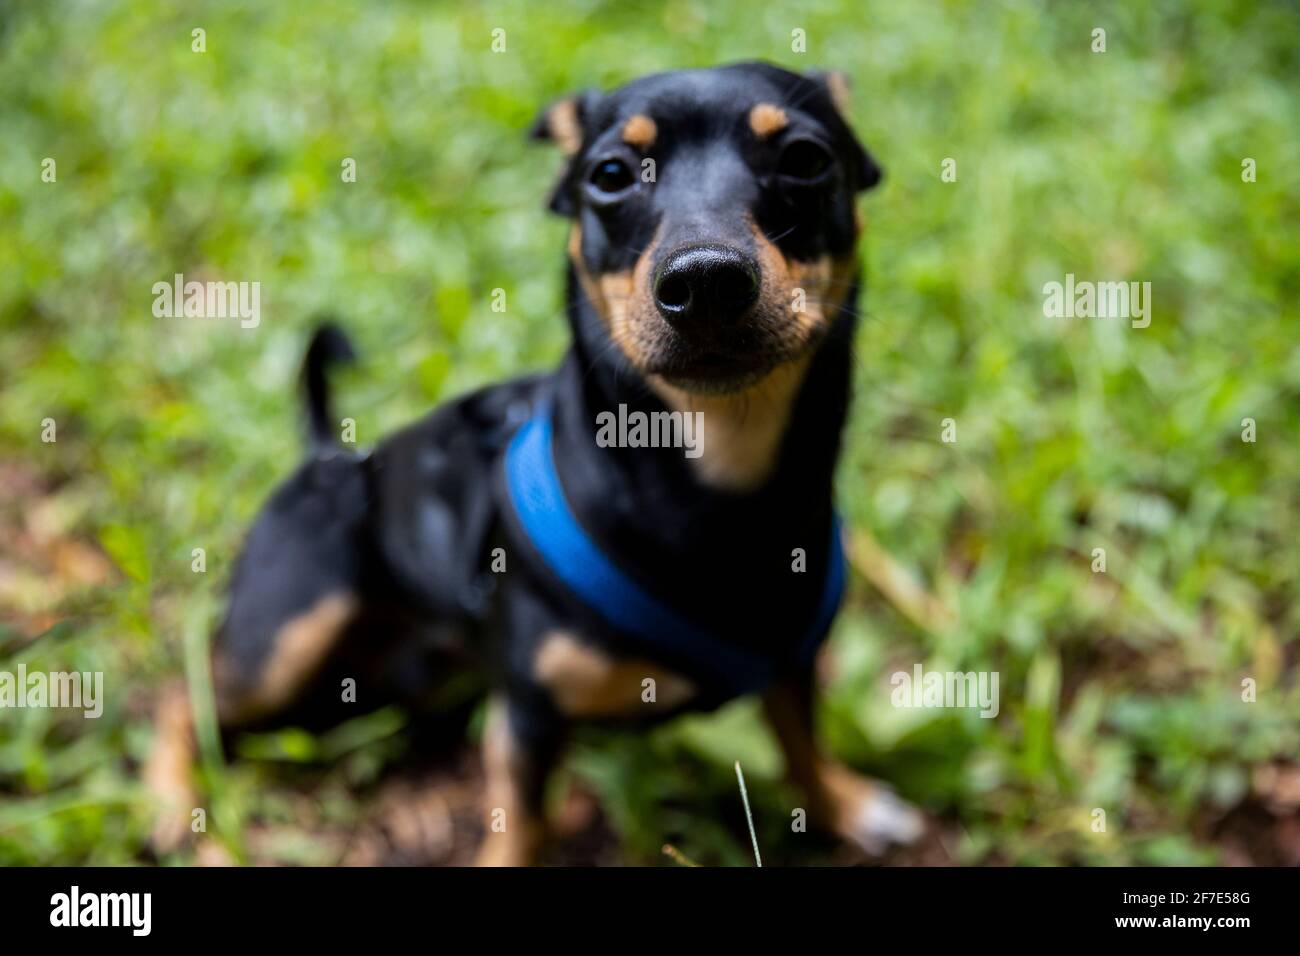 A cherished pet sitting gracefully while wearing his harness on a hike Stock Photo